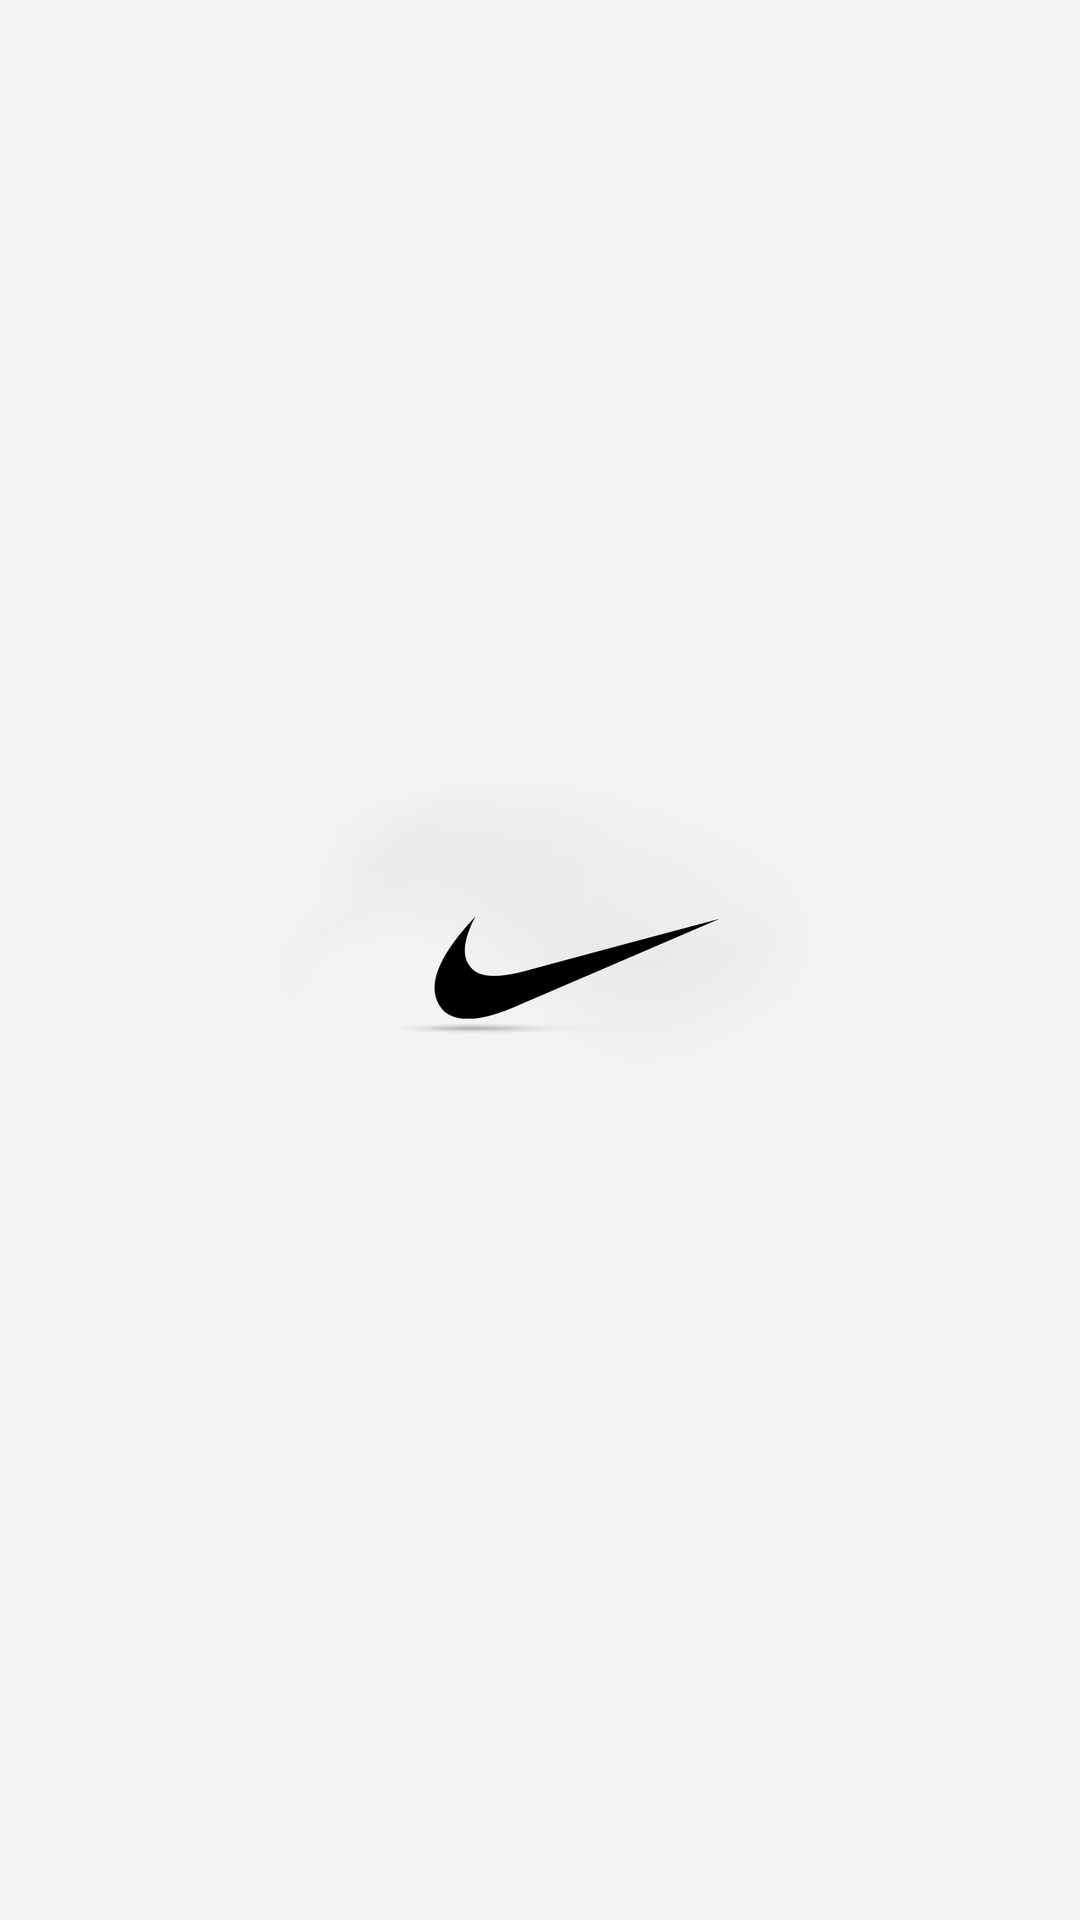 1080x1920 HD Nike Backgrounds for Iphone